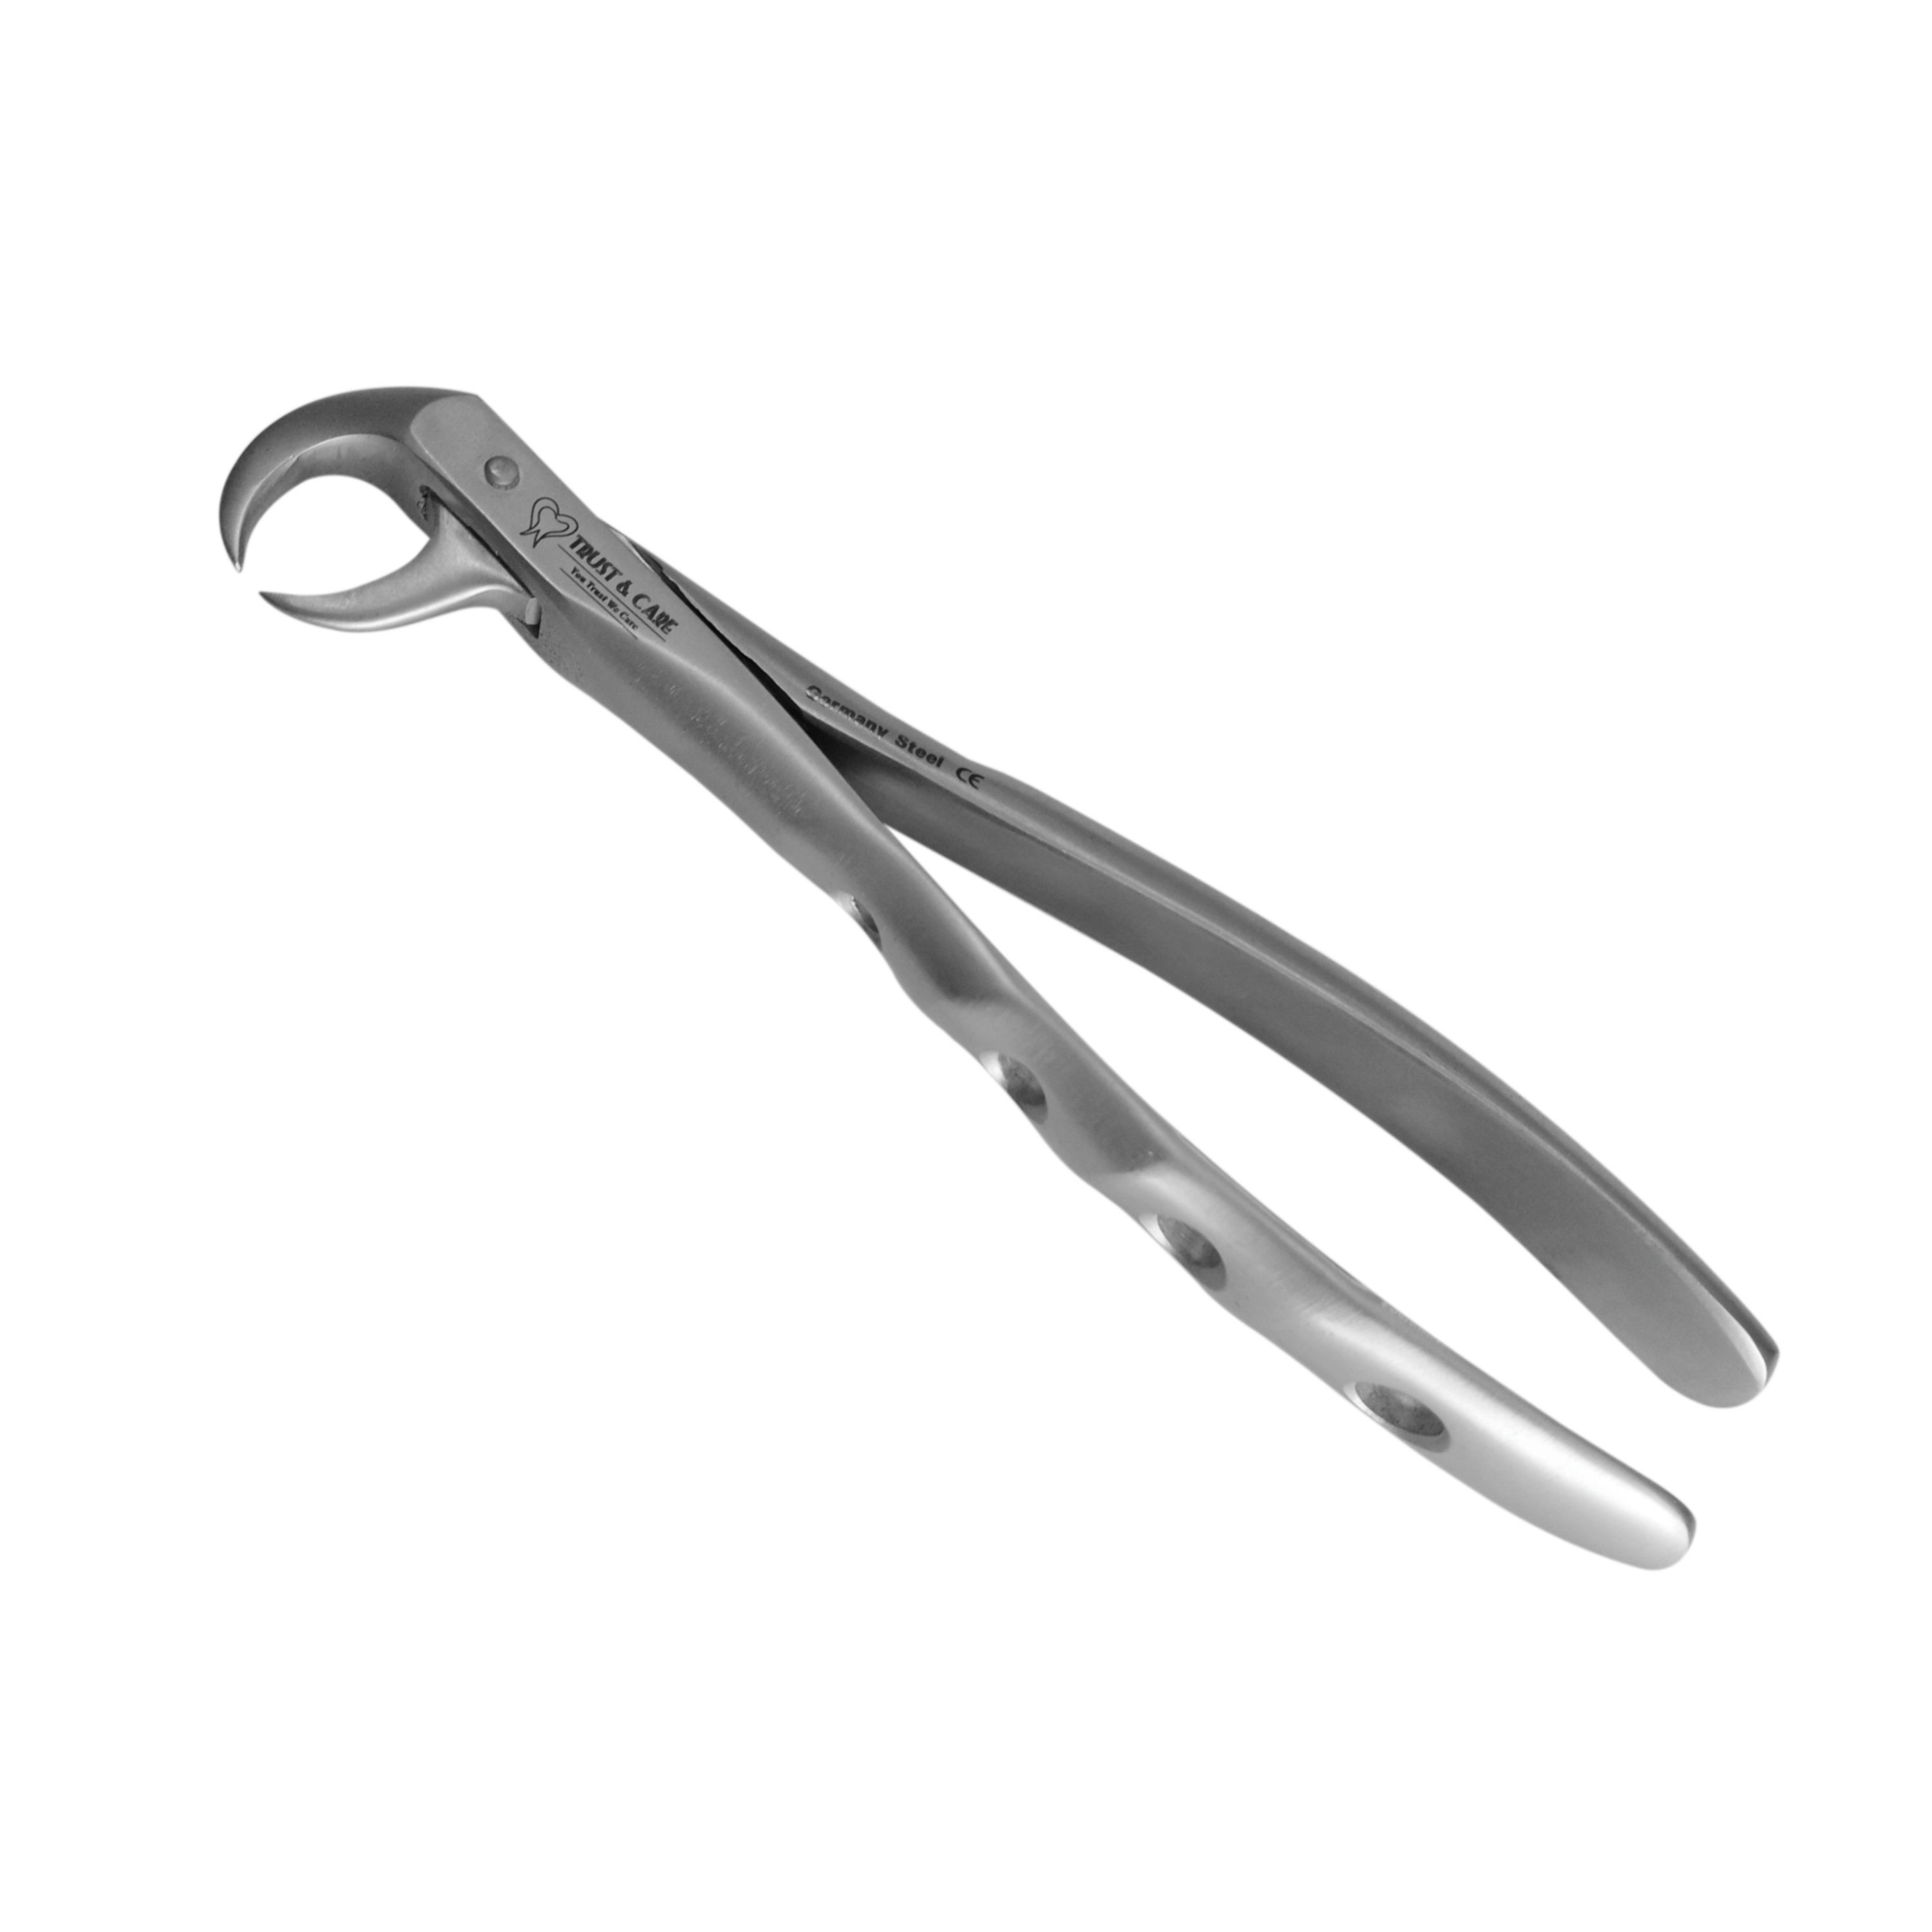 Trust & Care Tooth Extraction Forcep Lower Molars Cow Horn Fig No. 86 Premium